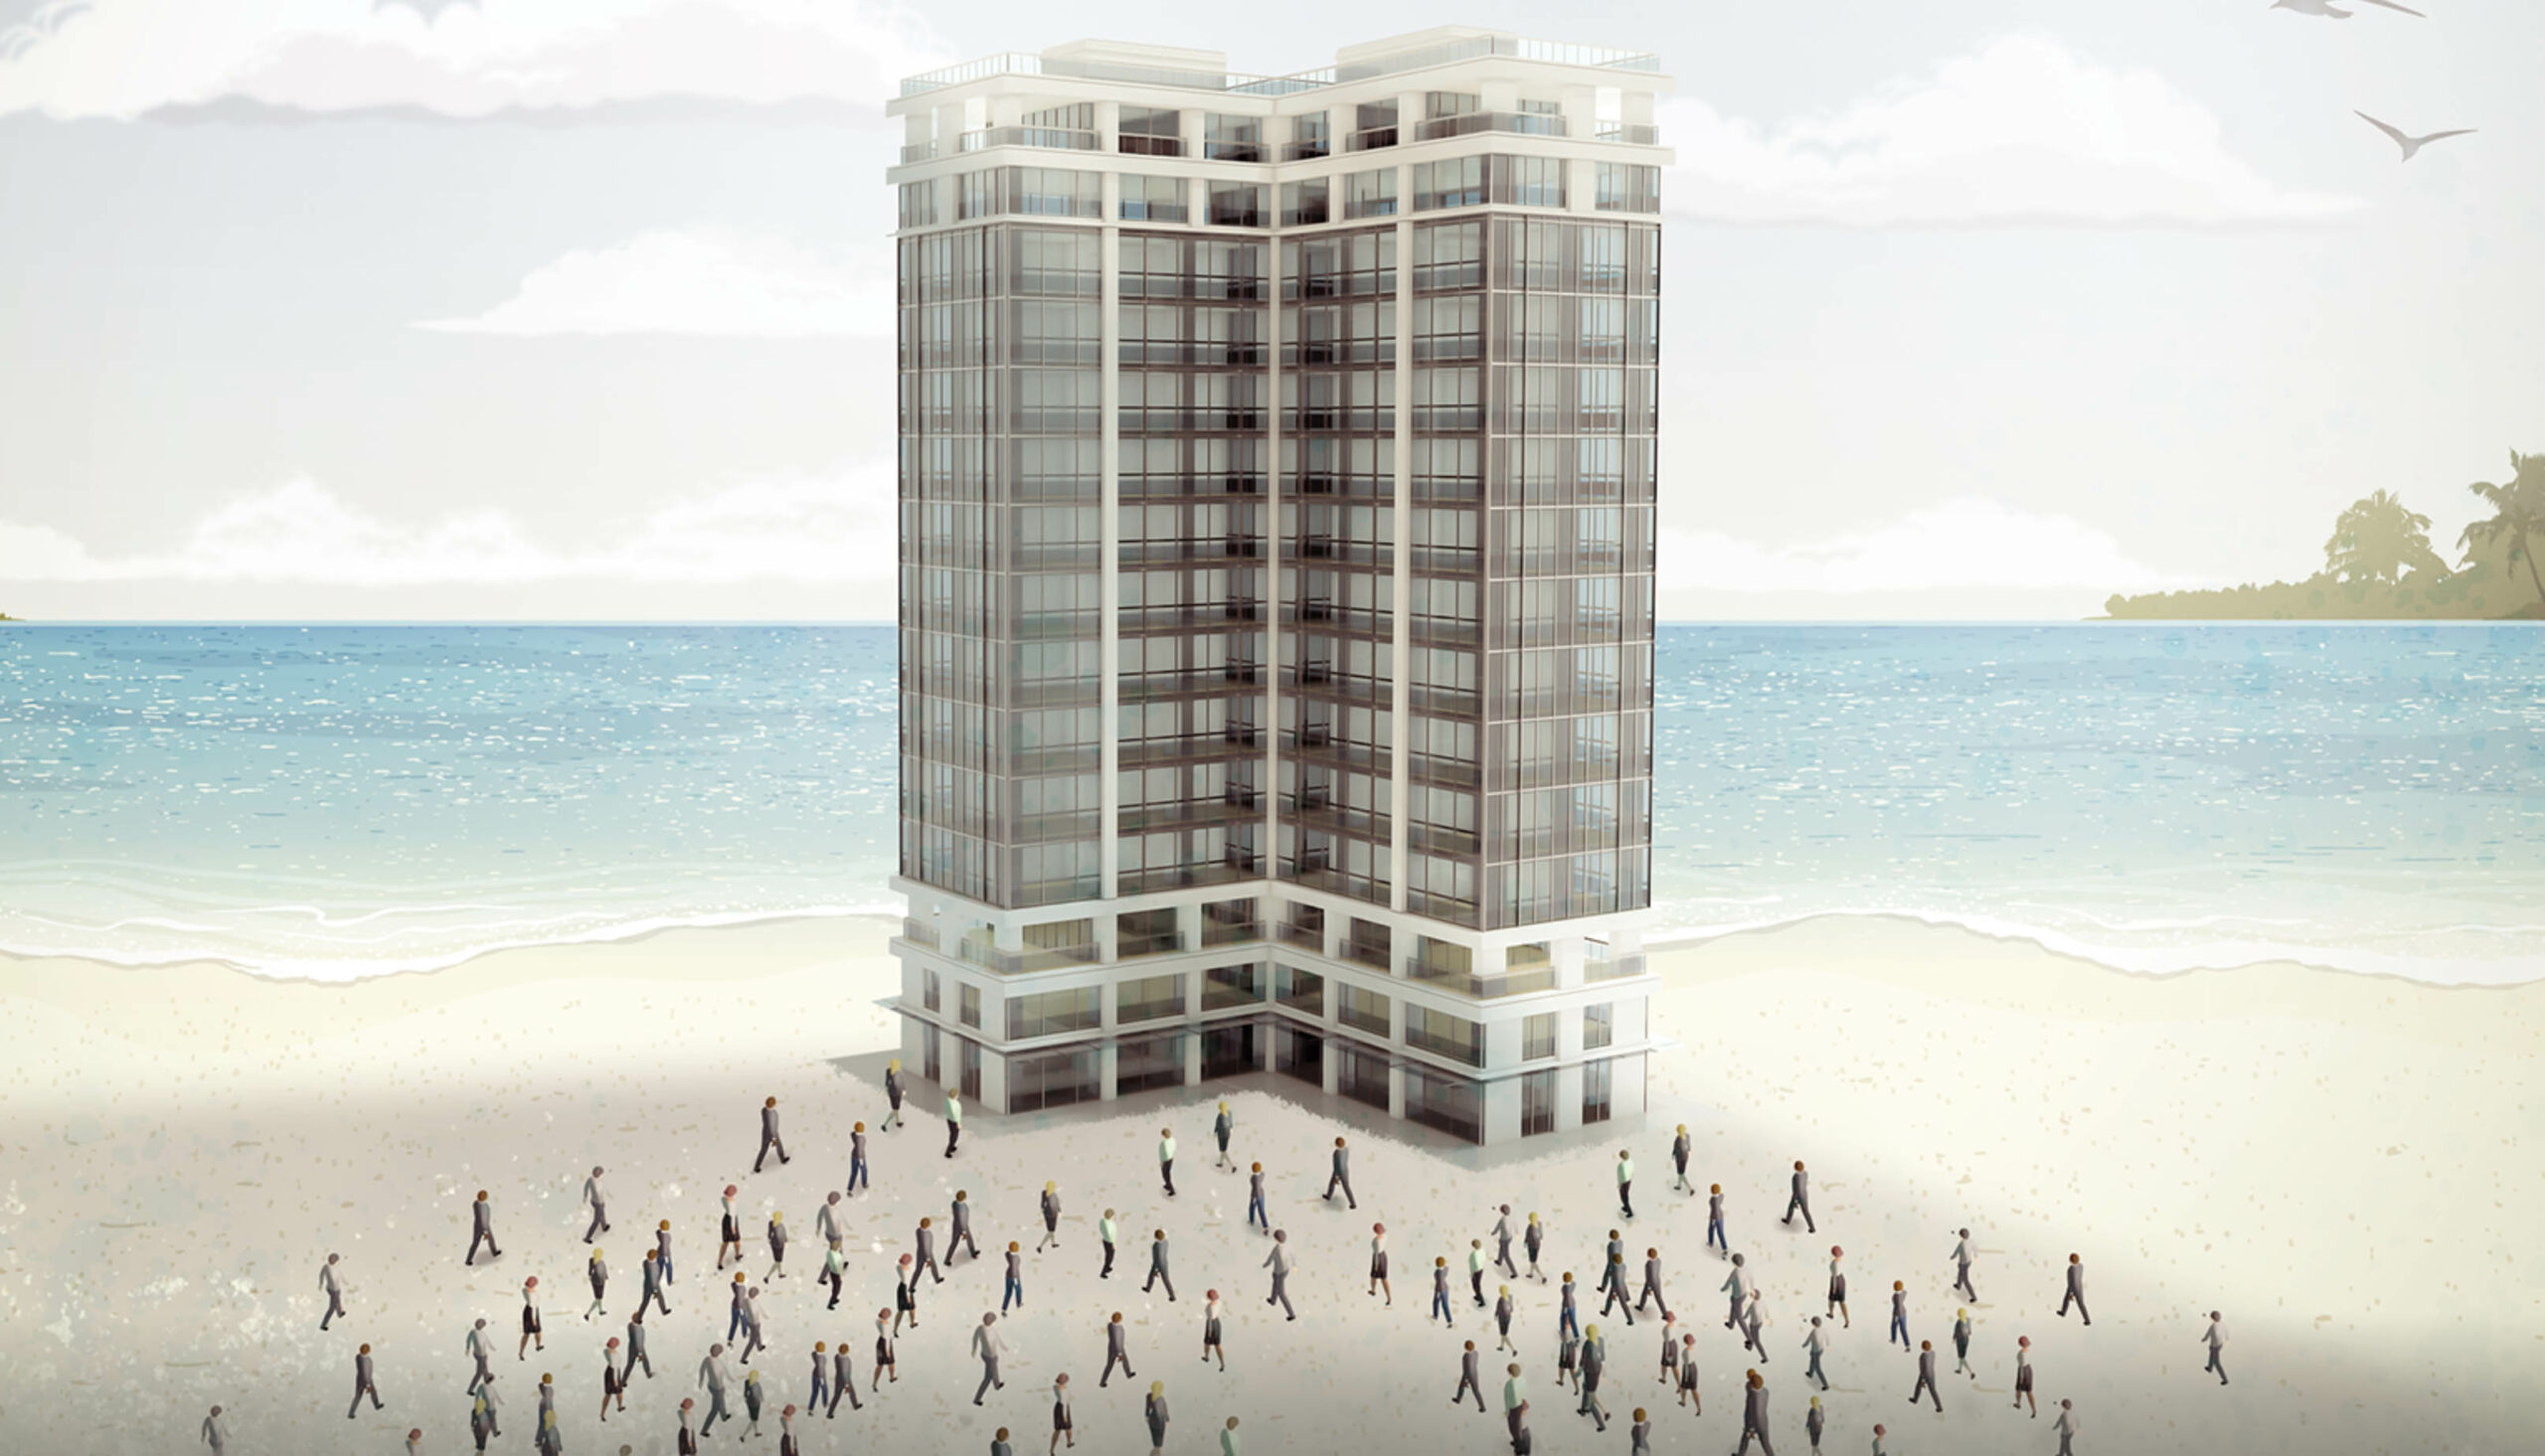 OFFICES ON THE BEACH – South Florida Business Journal, January 20, 2022